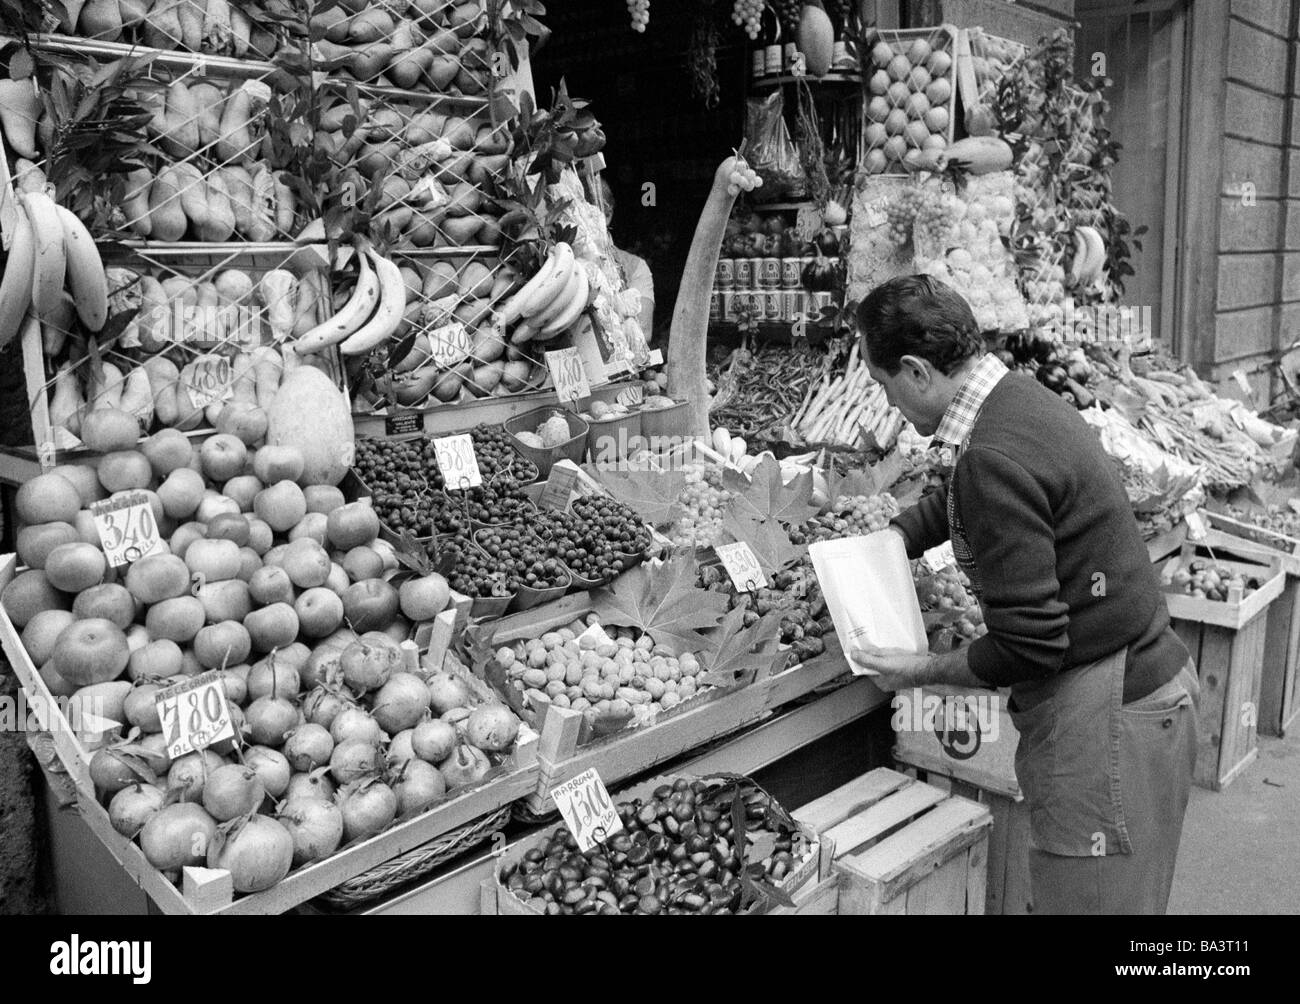 Seventies, black and white photo, people, weekly market, market stall with fruit and vegetables, salesman, marketer, aged 40 to 50 years, Italy, Lombardy, Milan Stock Photo